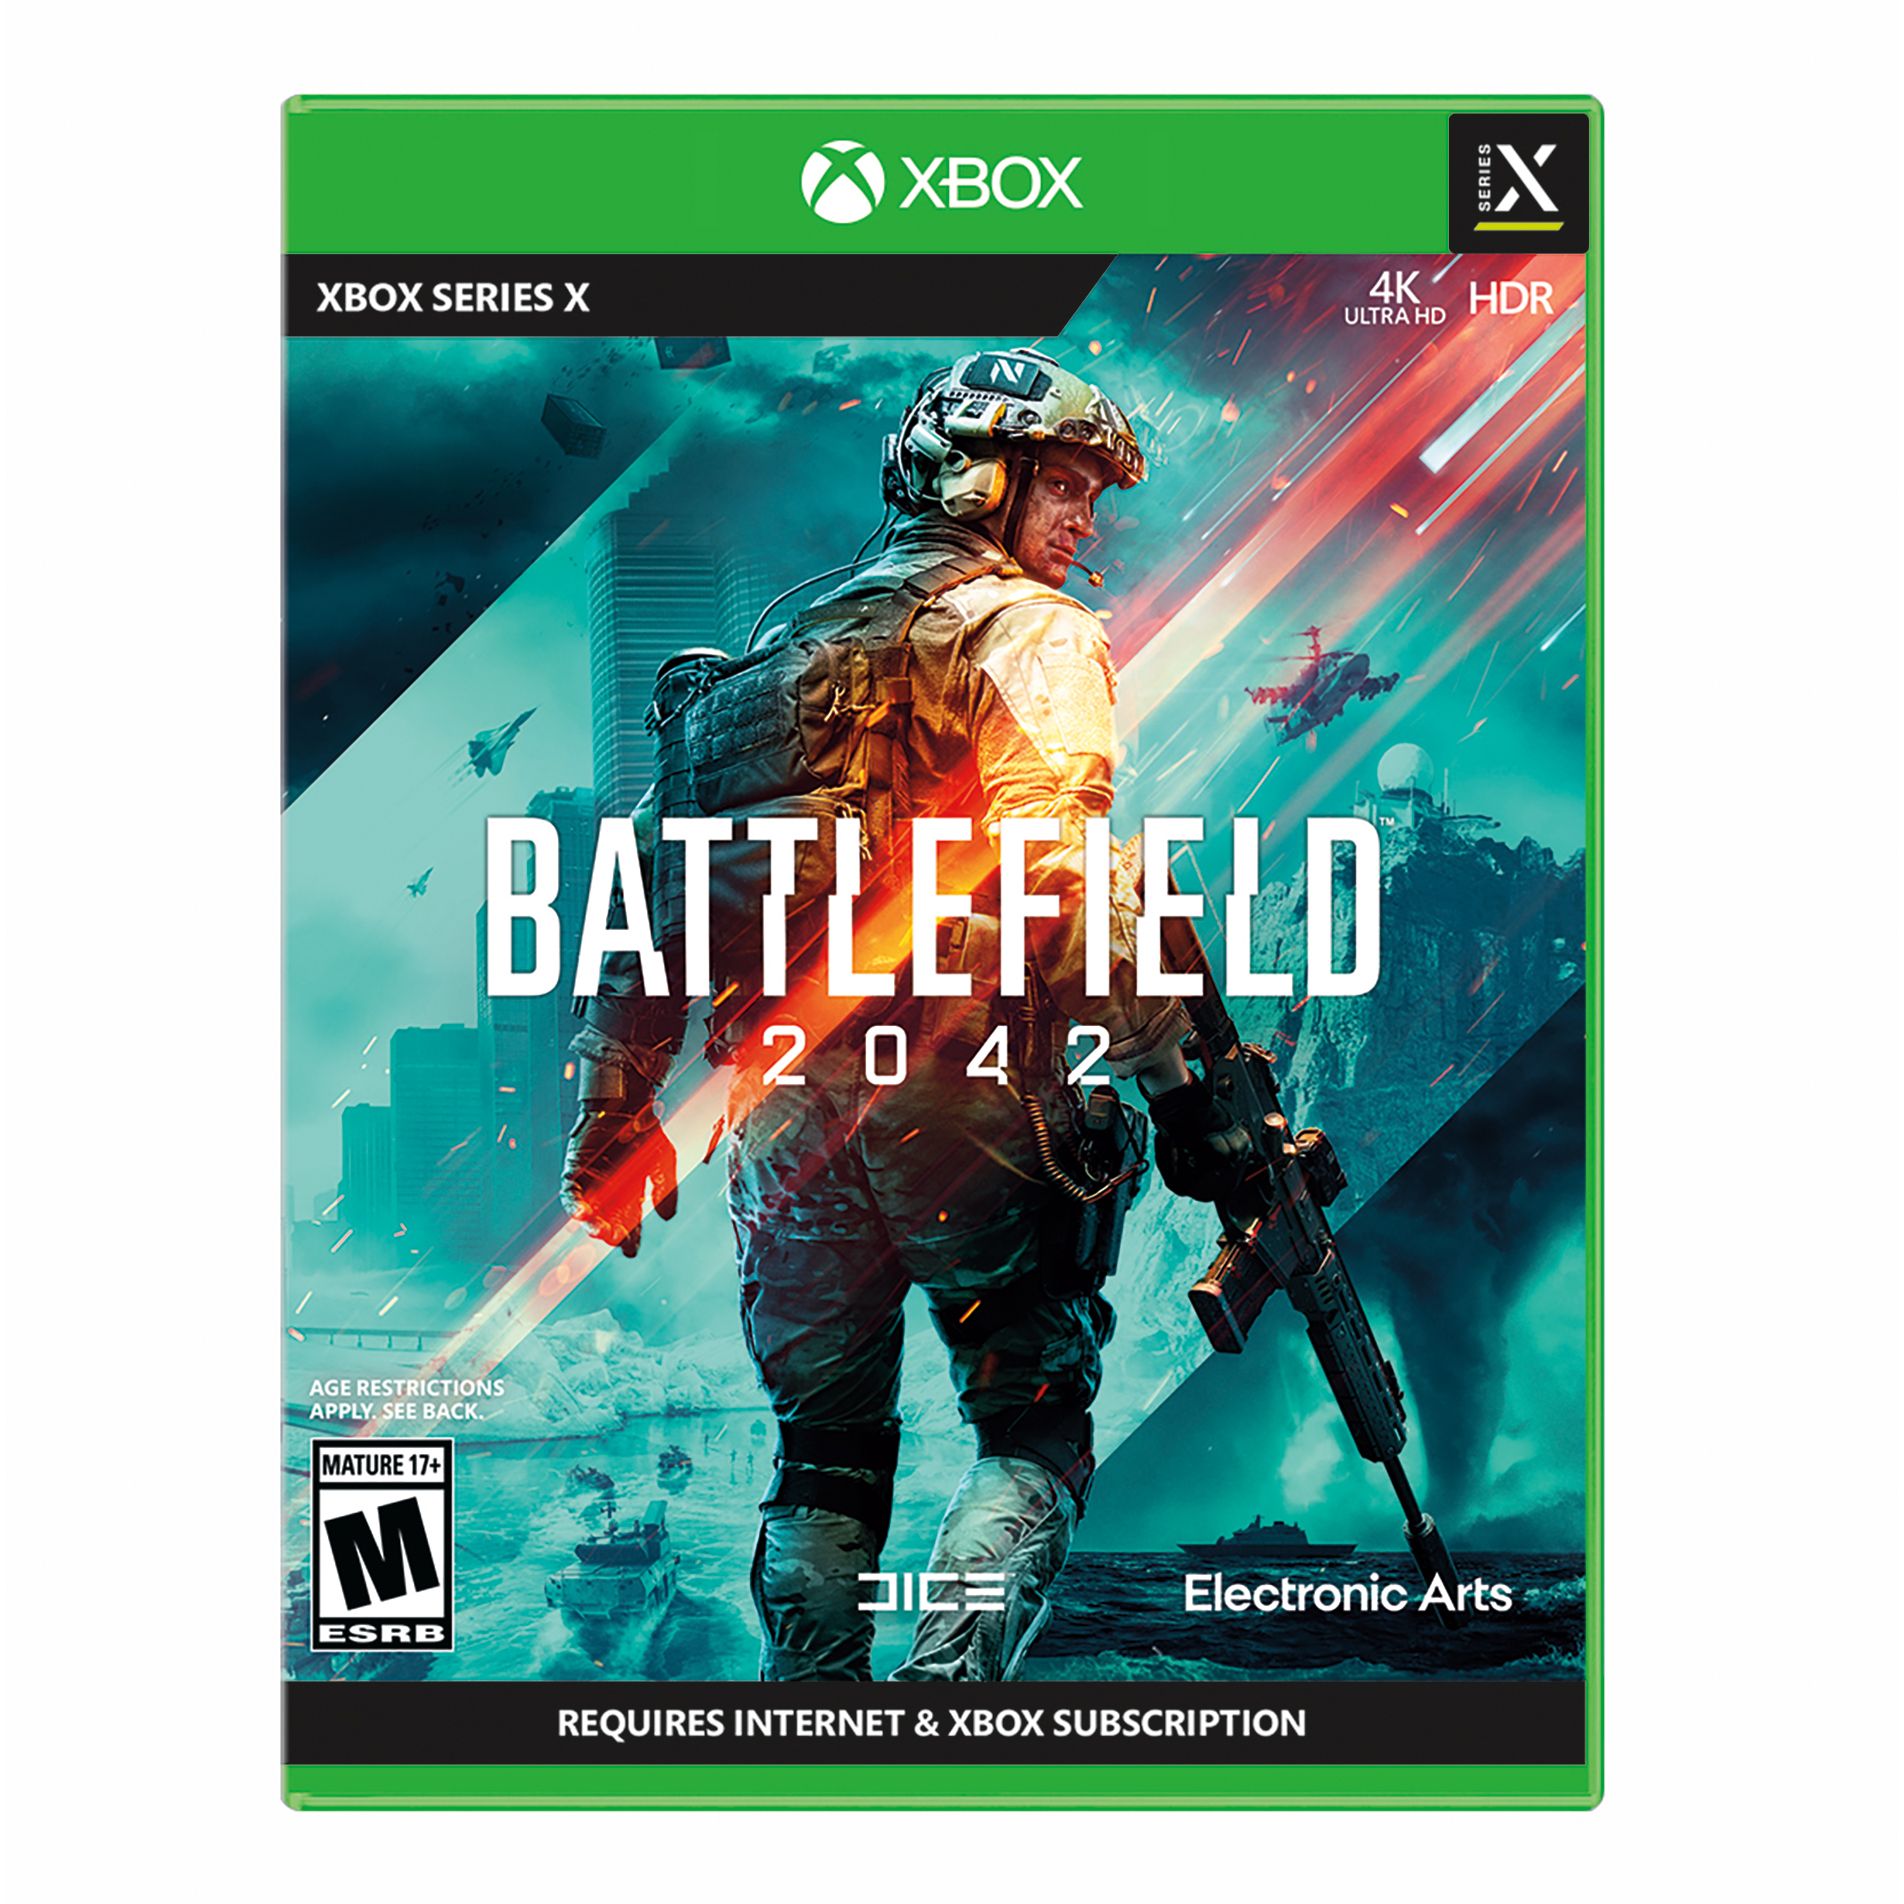 How to Download And Install Battlefield 2042 On Pc Laptop 